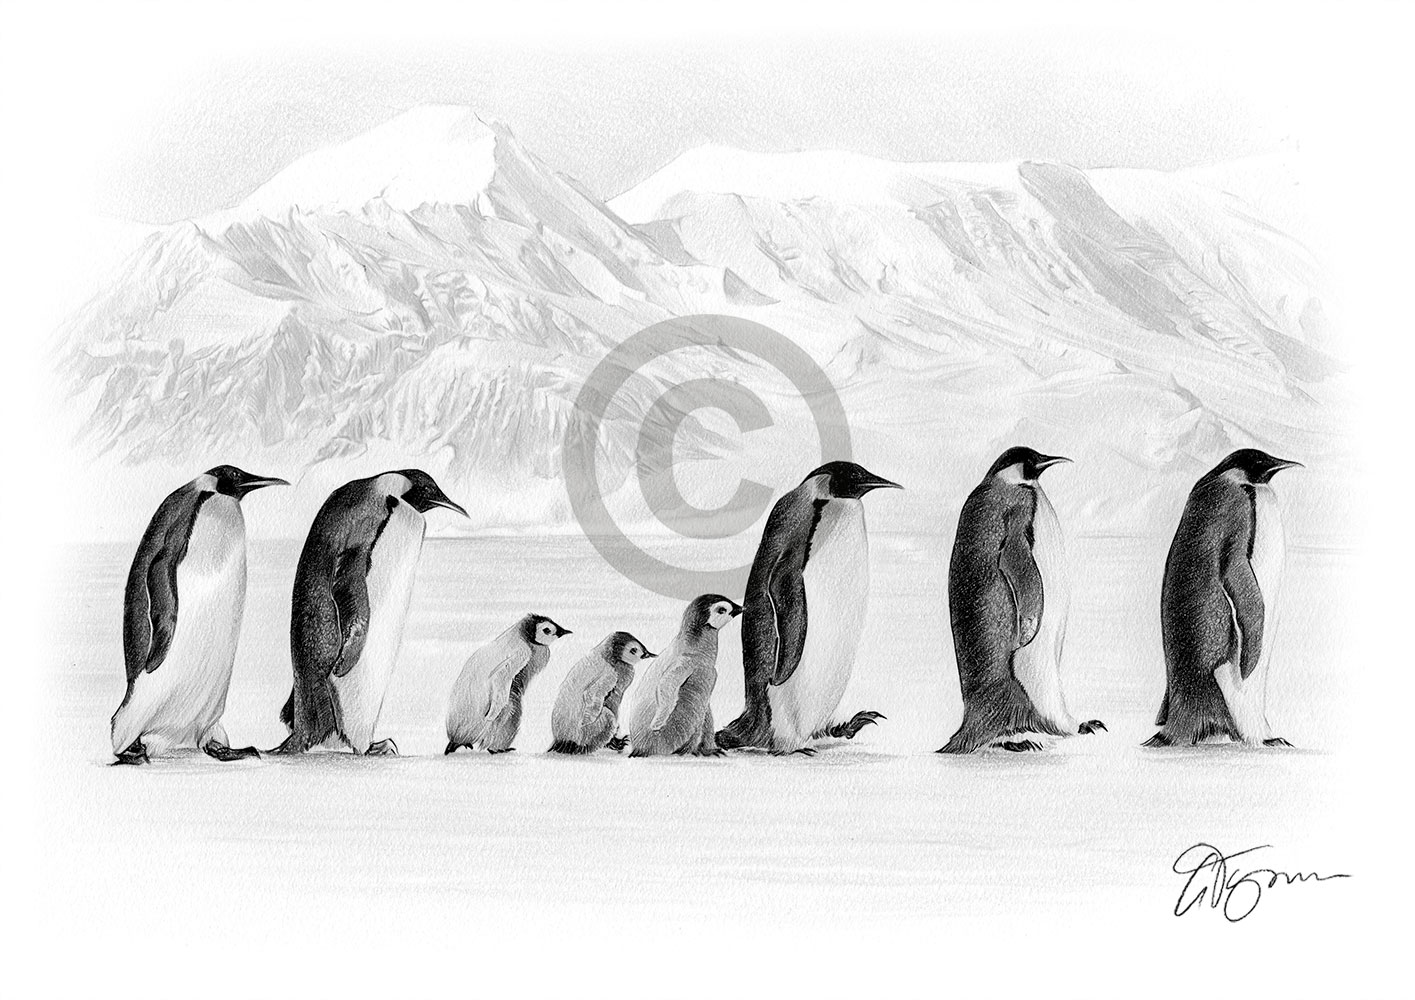 Pencil drawing of a group of penguins in antarctica by UK artist Gary Tymon